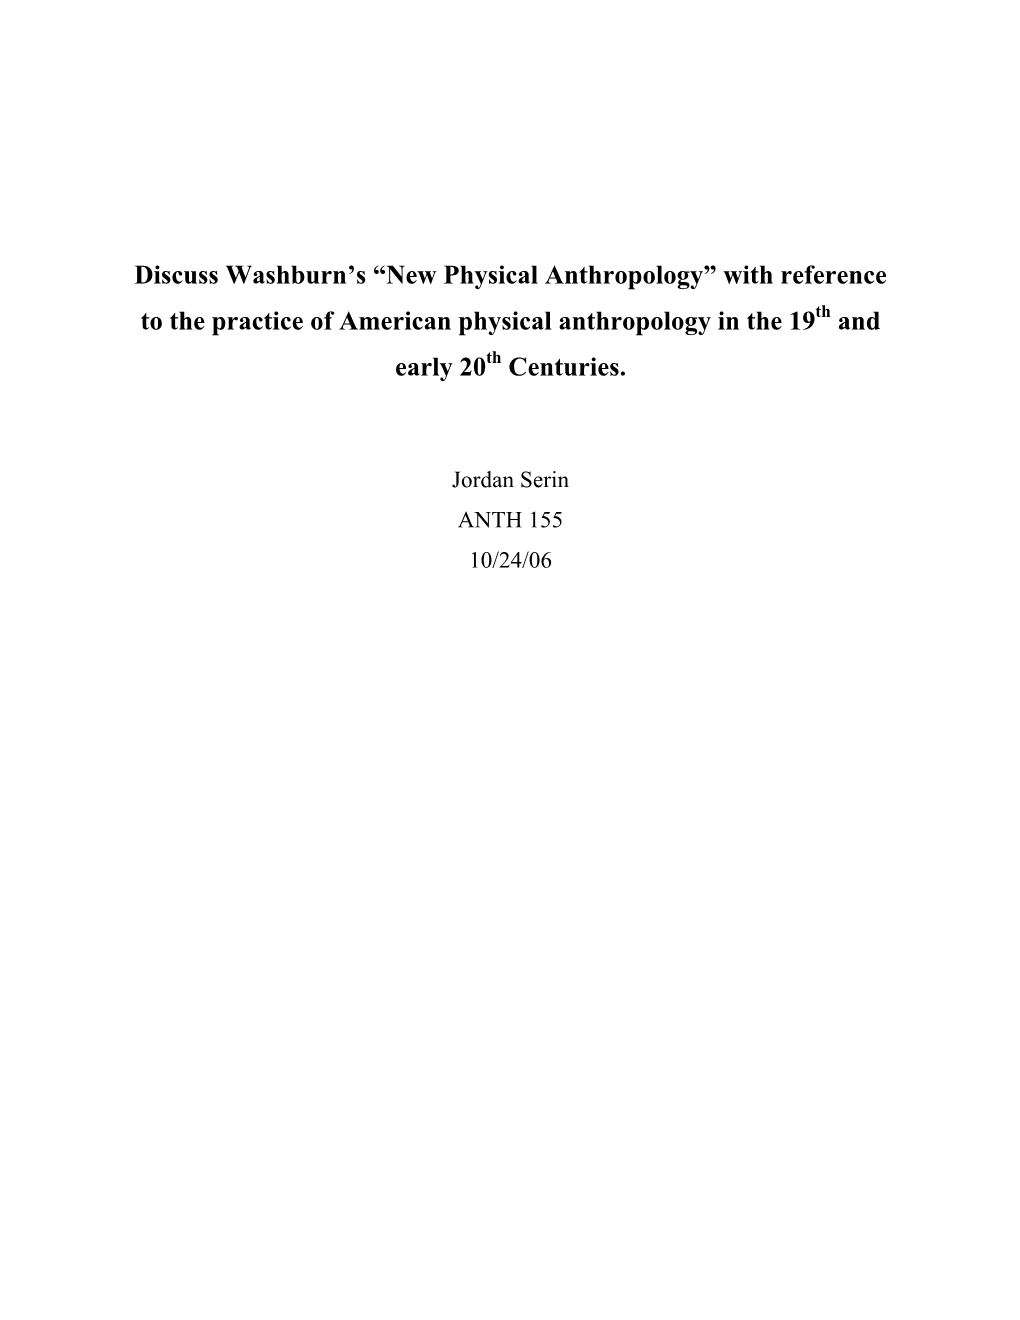 Discuss Washburn's “New Physical Anthropology” with Reference to the Practice of American Physical Anthropology in the 19